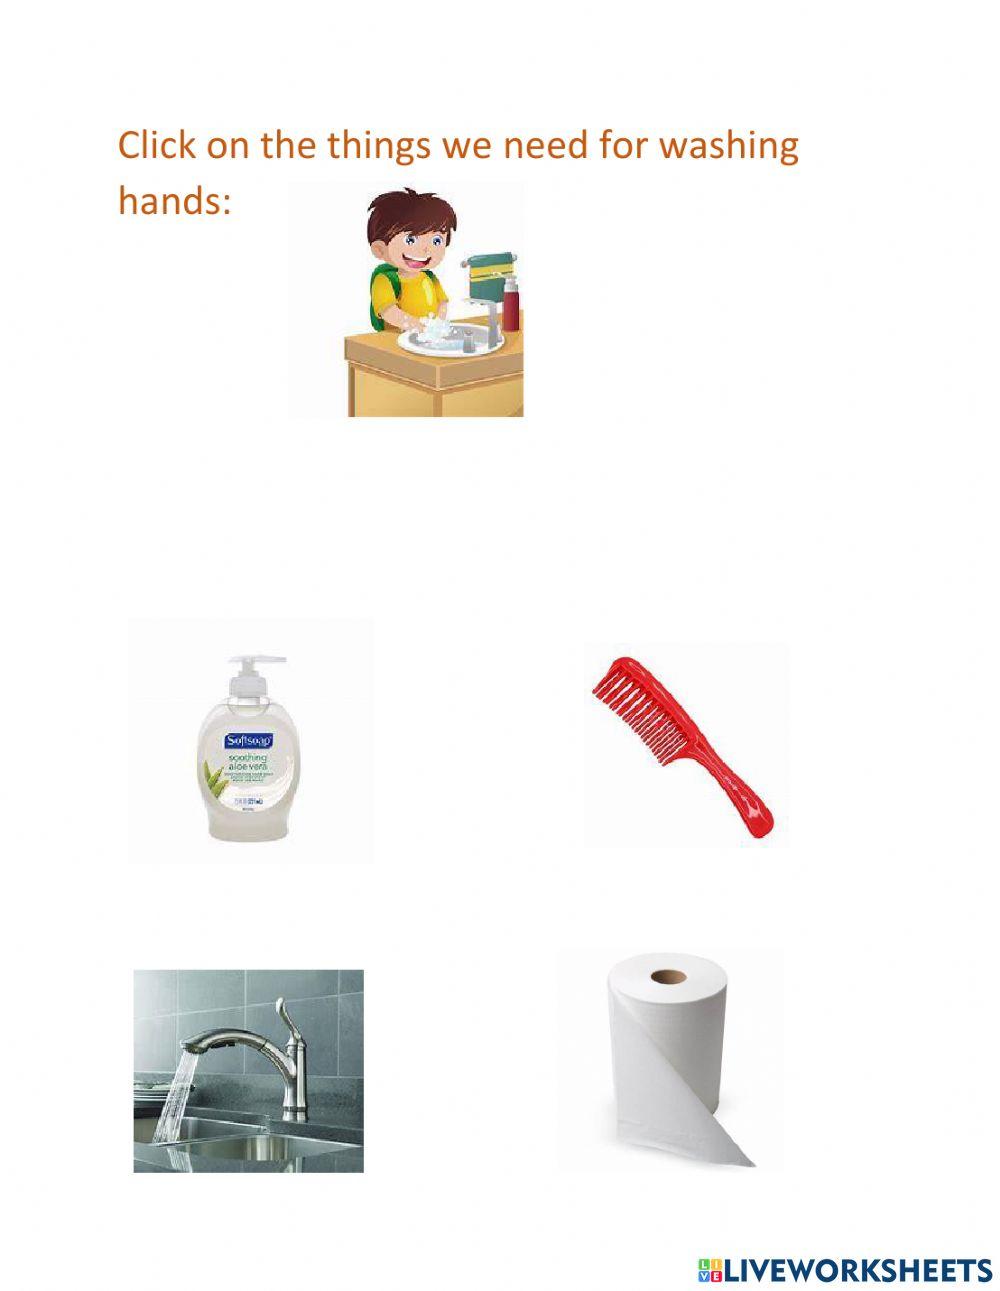 Things we need in washing hands